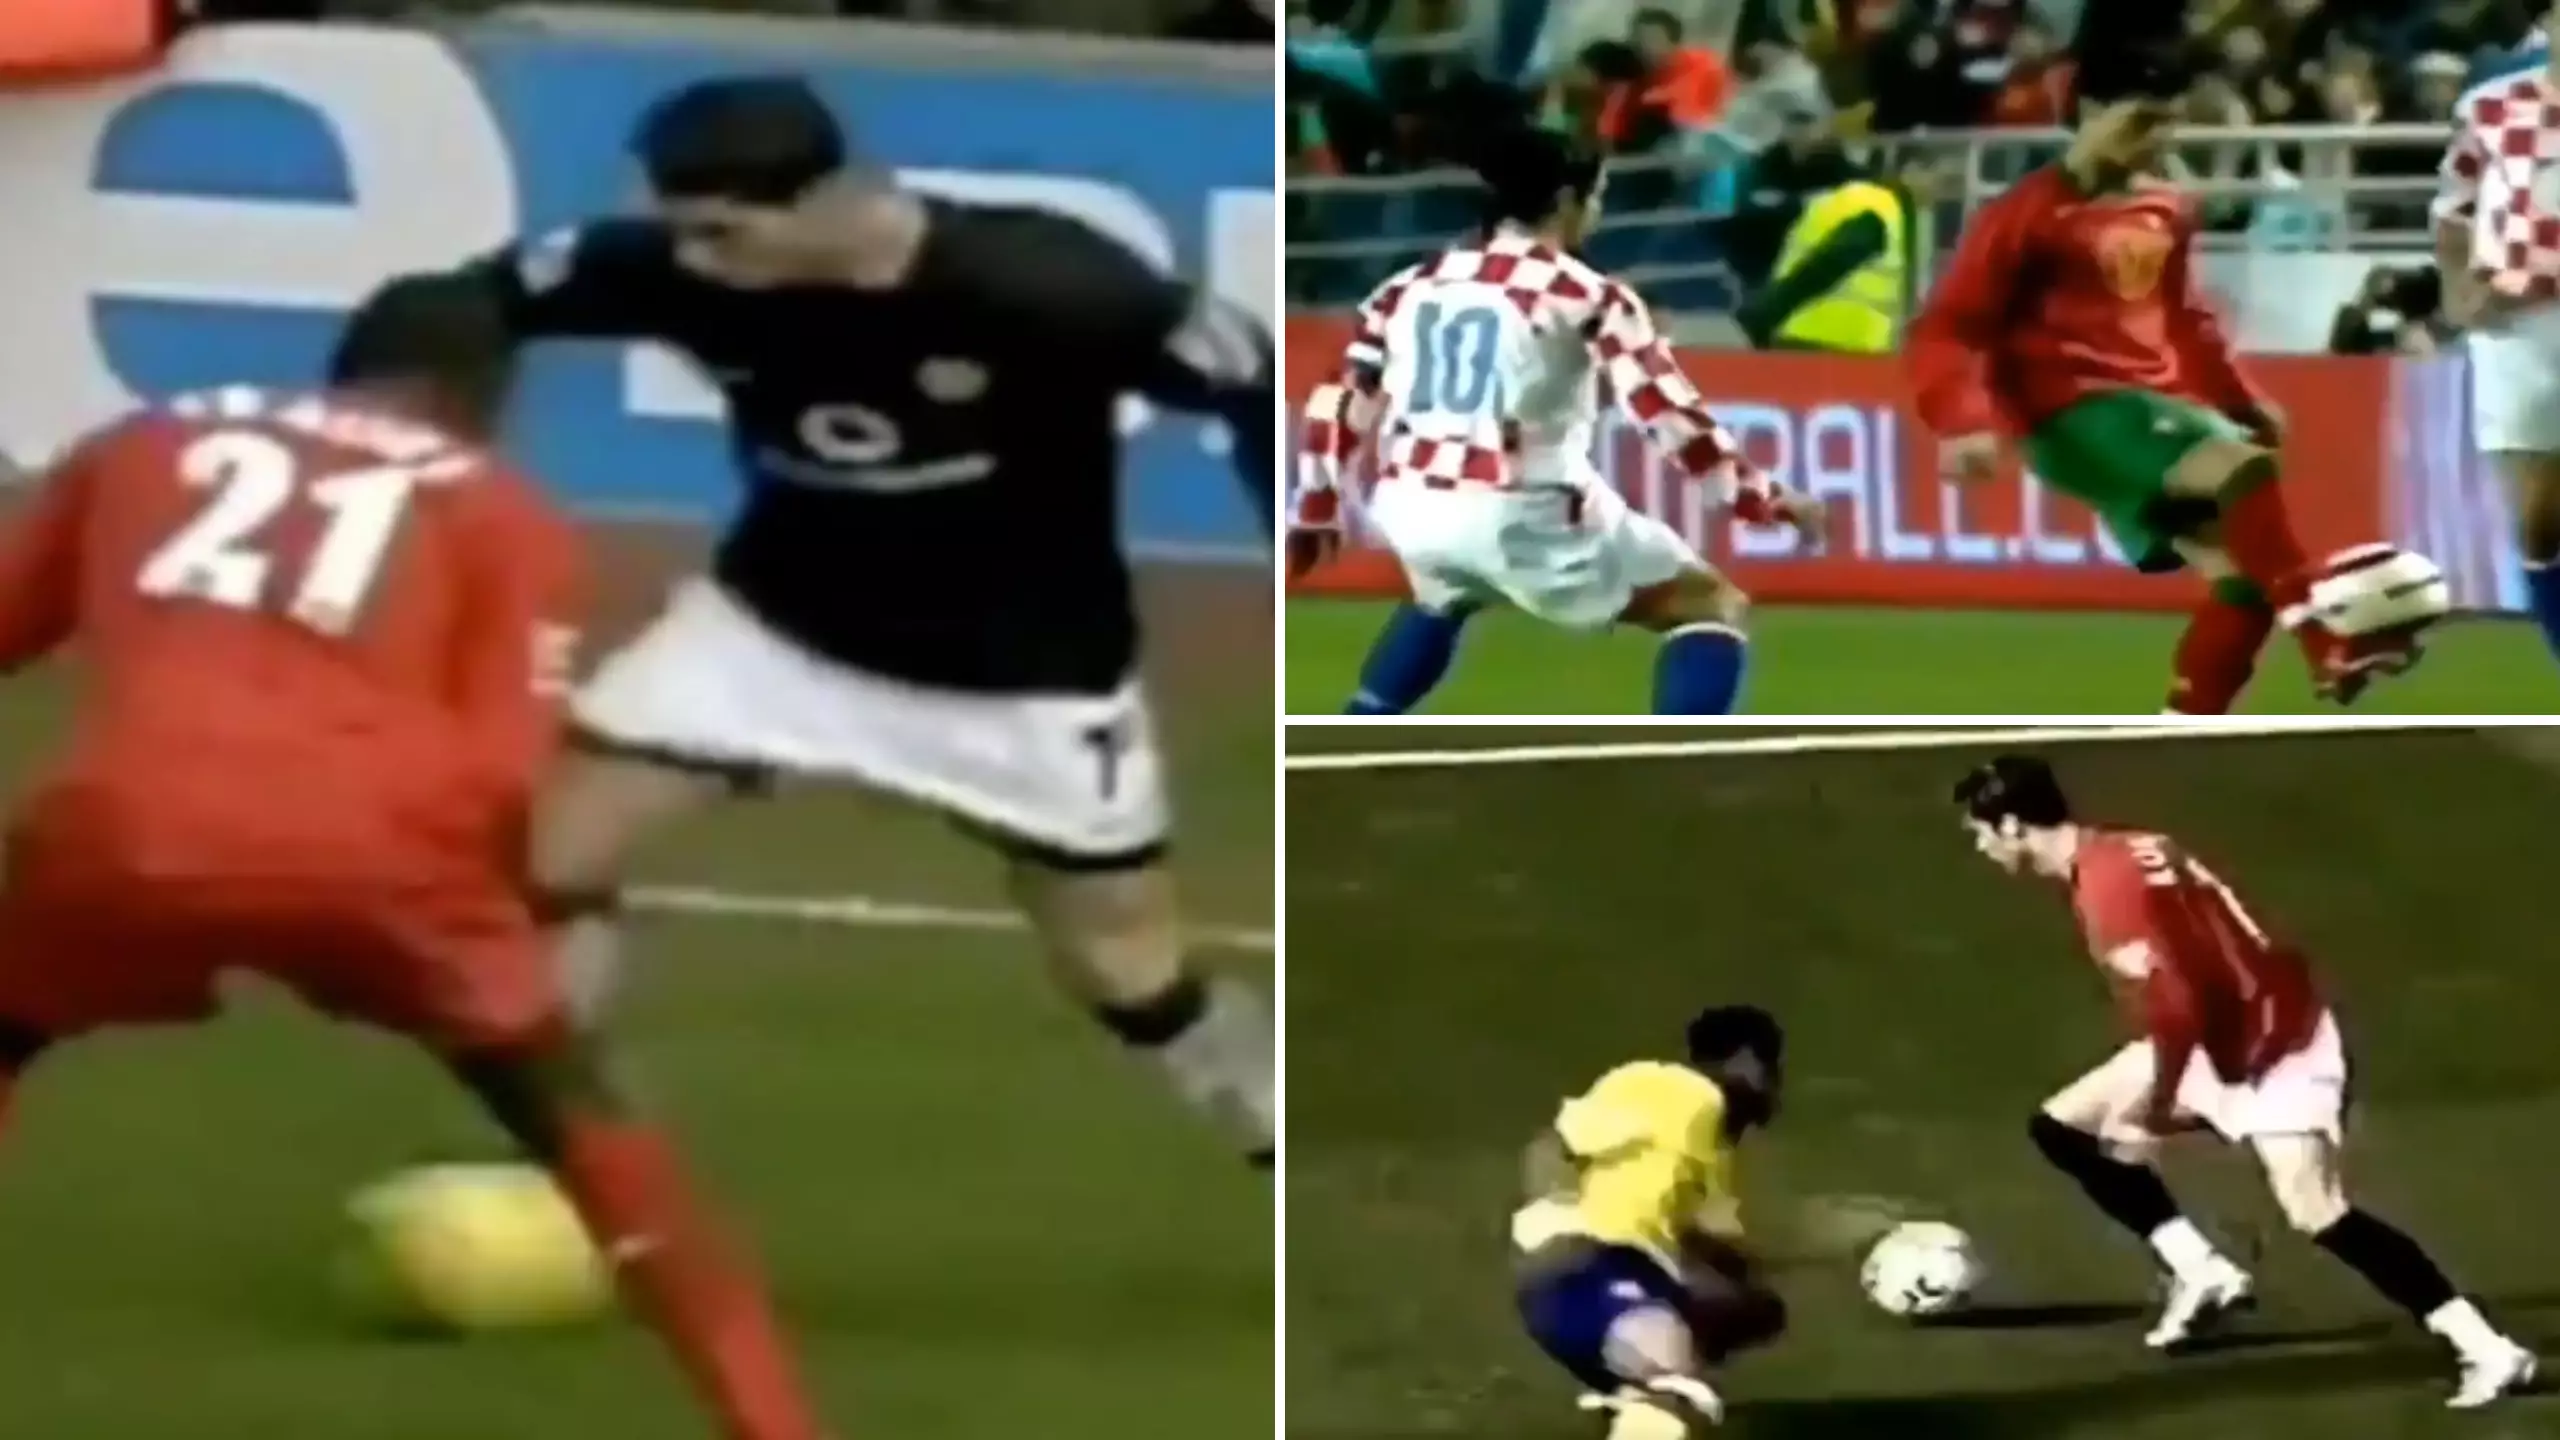 Video Of Young Cristiano Ronaldo Dropping Defenders 'Like It's Nothing' Is Incredible To Watch